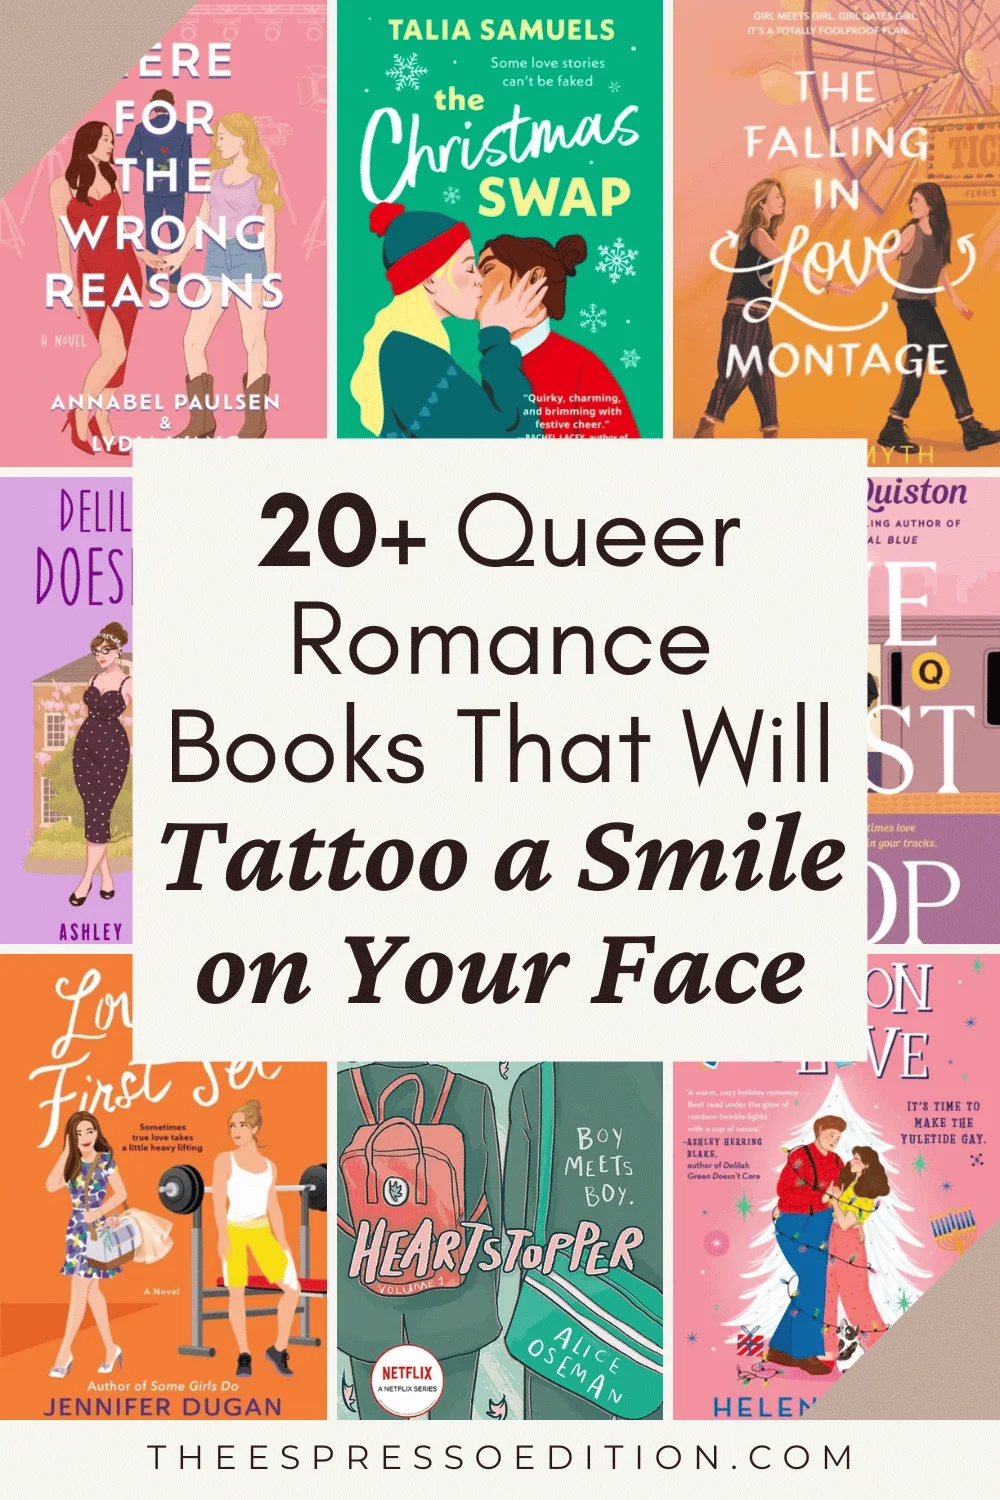 20+ Queer Romance Books That Will Tattoo a Smile on Your Face by The Espresso Edition cozy bookish blog